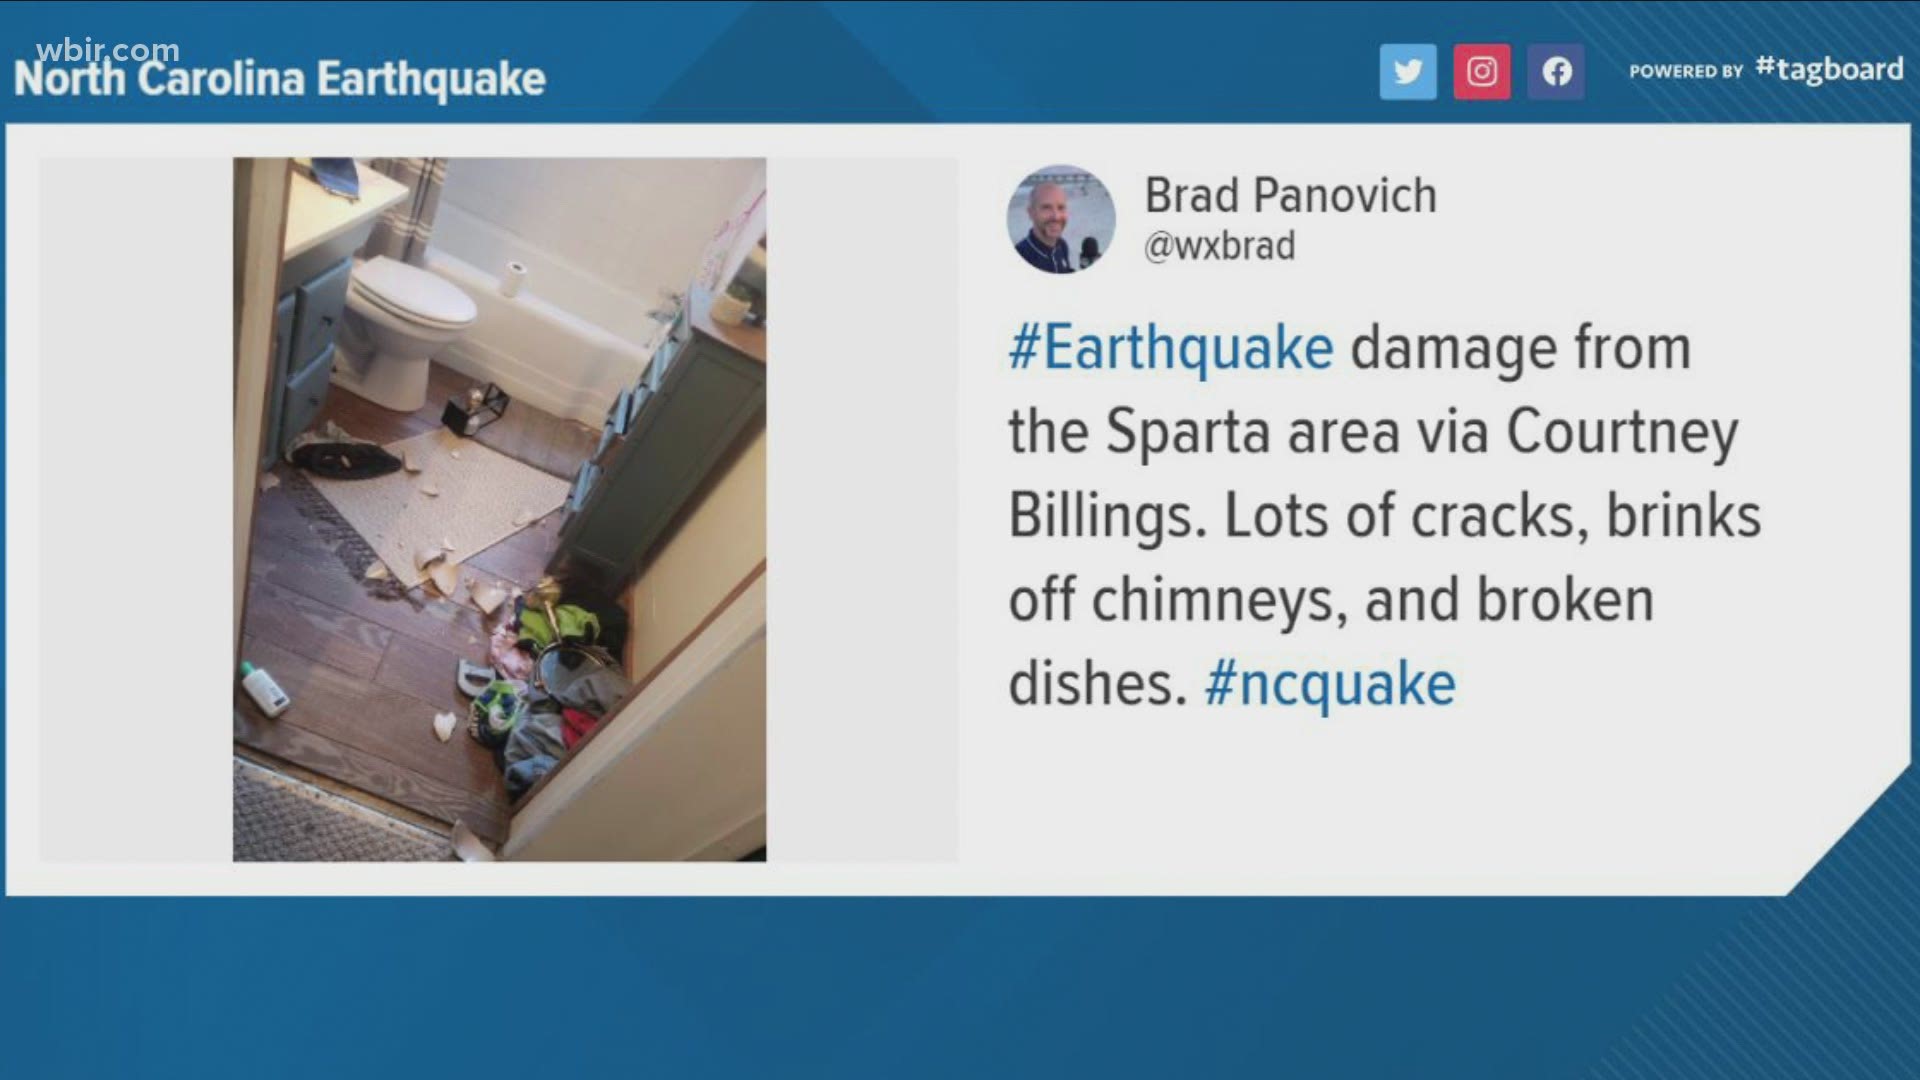 This was the strongest earthquake in North Carolina since 1916.